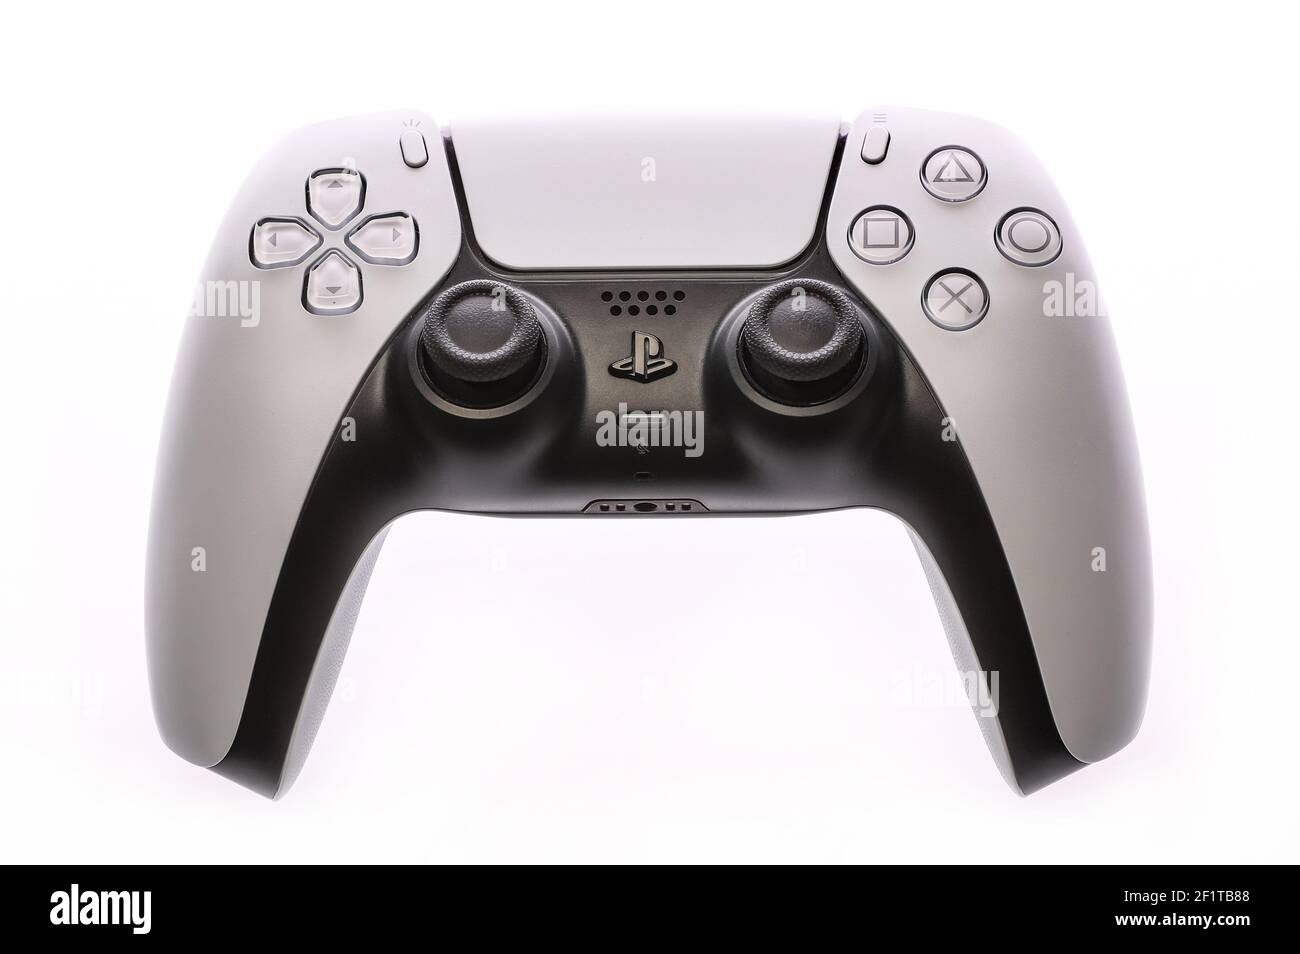 Playstation 5 or PS5 controller on a white background Stock Photo